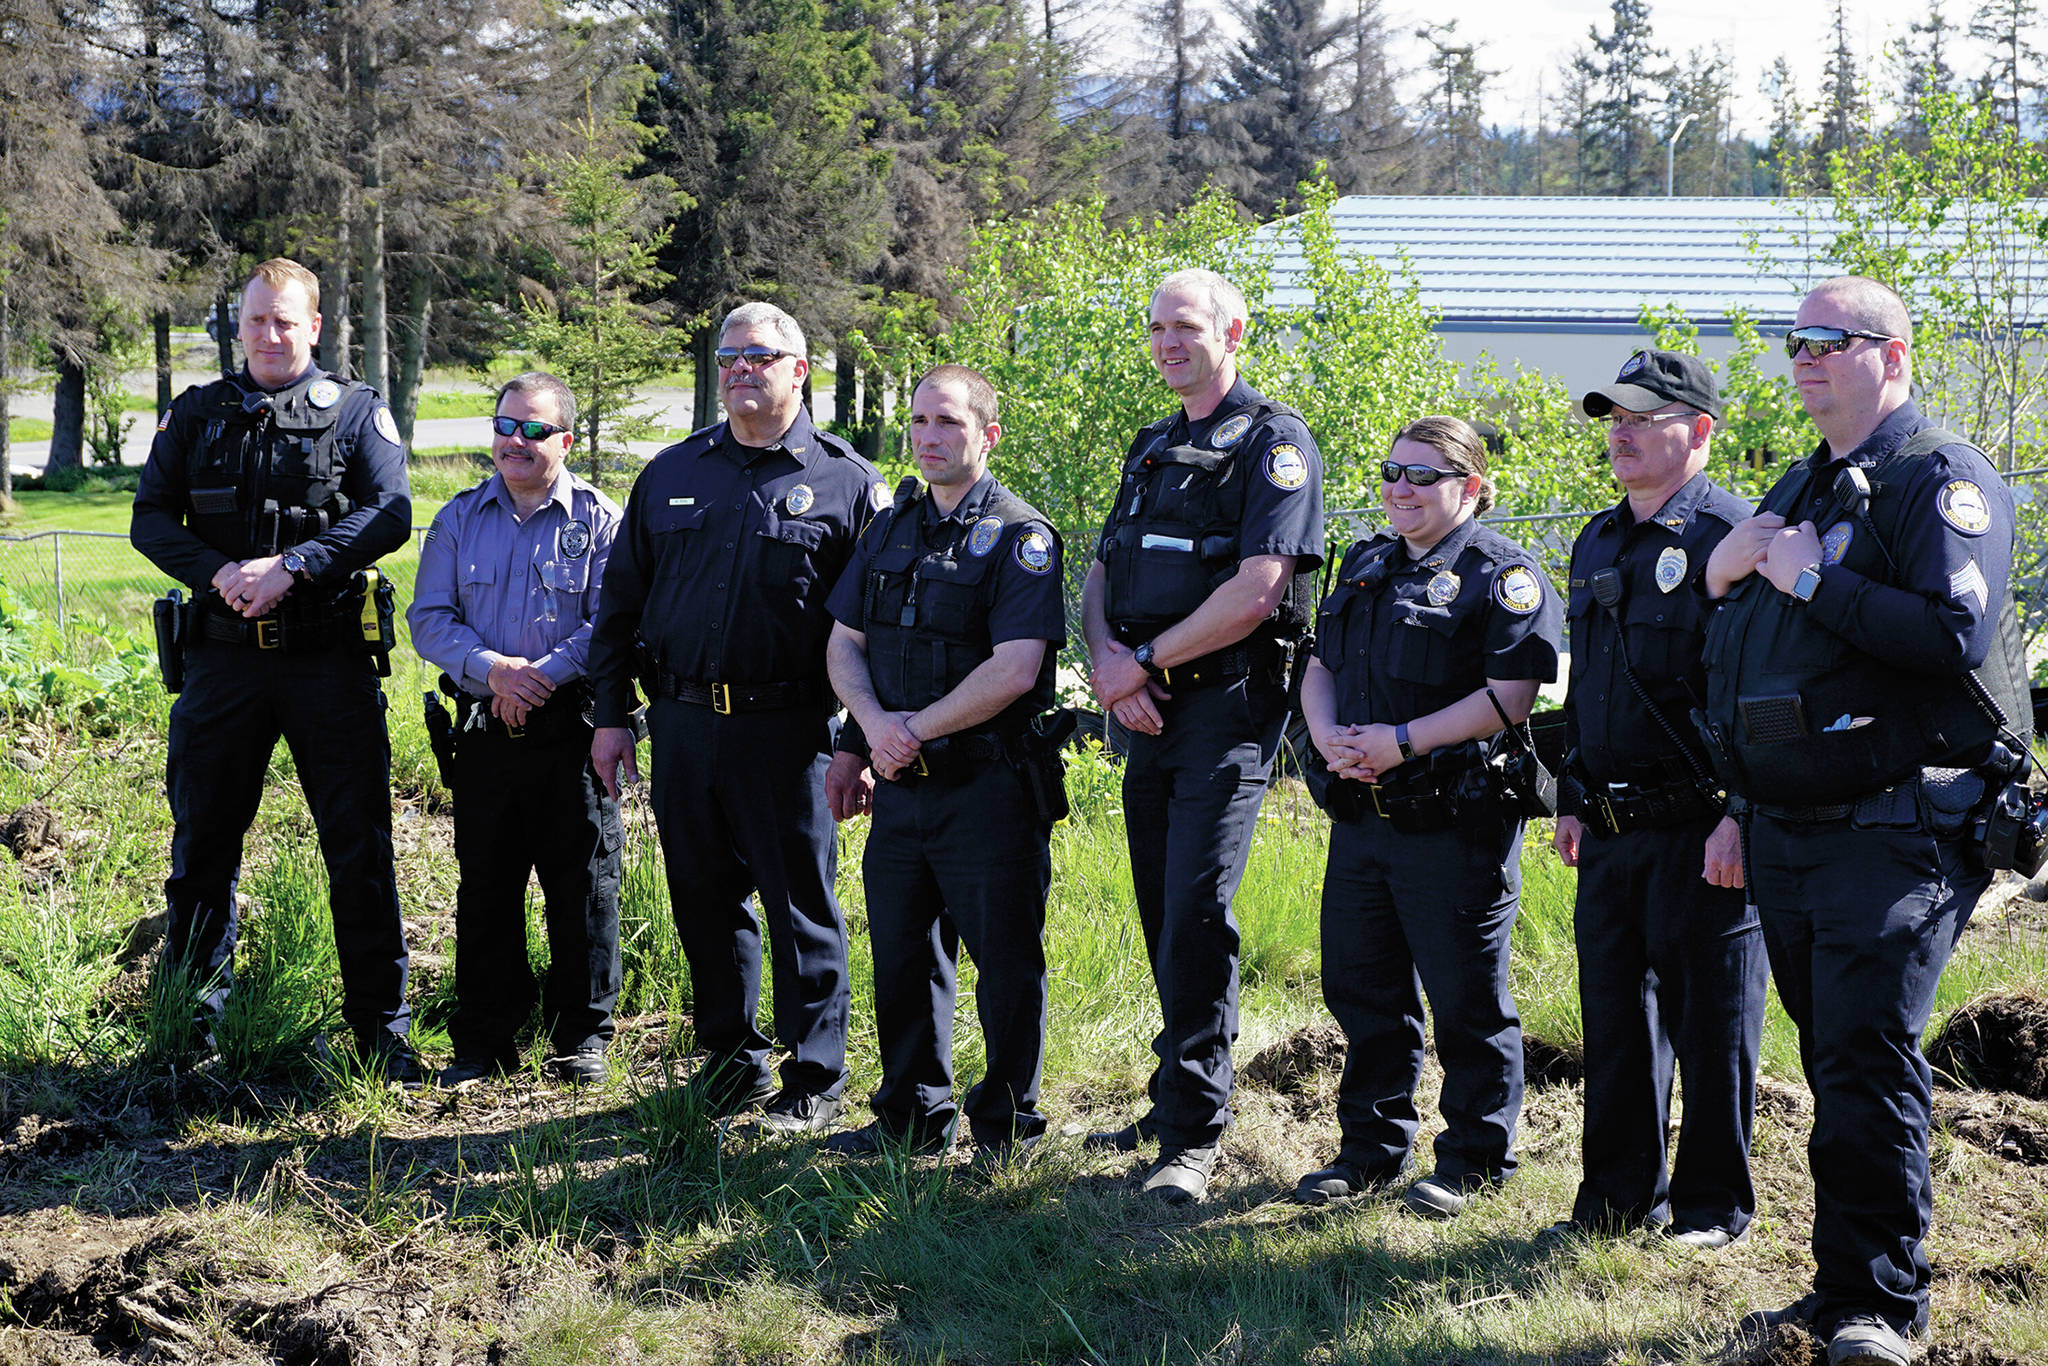 Homer Police Chief Mark Robl (third from left) stands with some of the Homer Police Department officers including Jim Knott (center) and Larry Baxter (far right) during a groundbreaking ceremonies on May 24, 2019 in Homer, Alaska. (Photo by Michael Armstrong/Homer News)